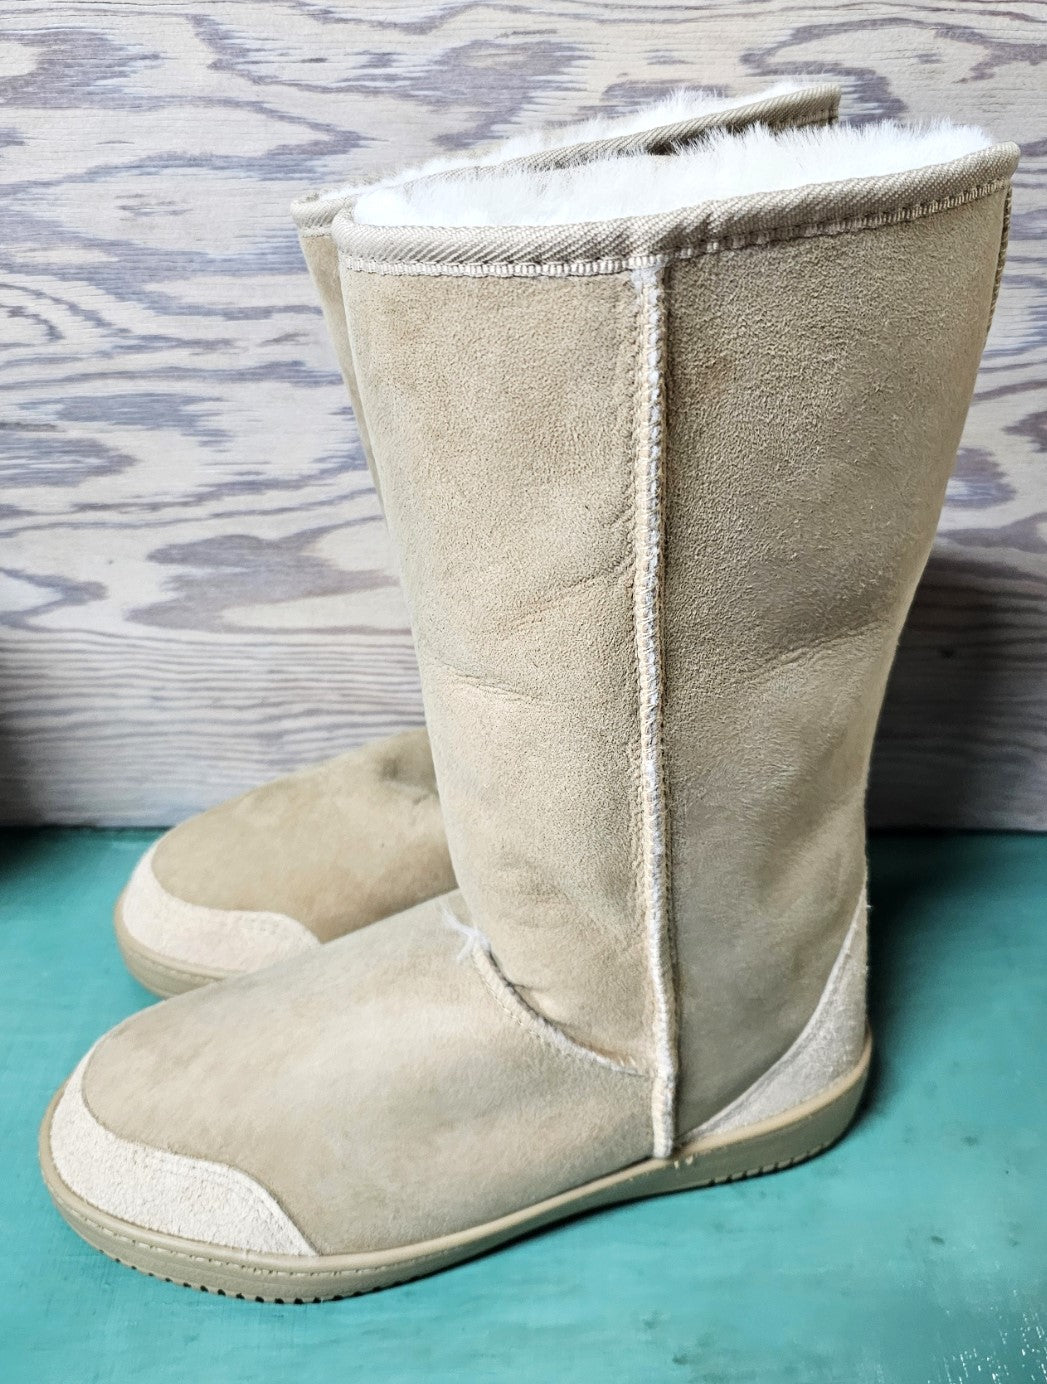 sheepskin slippers/boots for women Size CAD 9